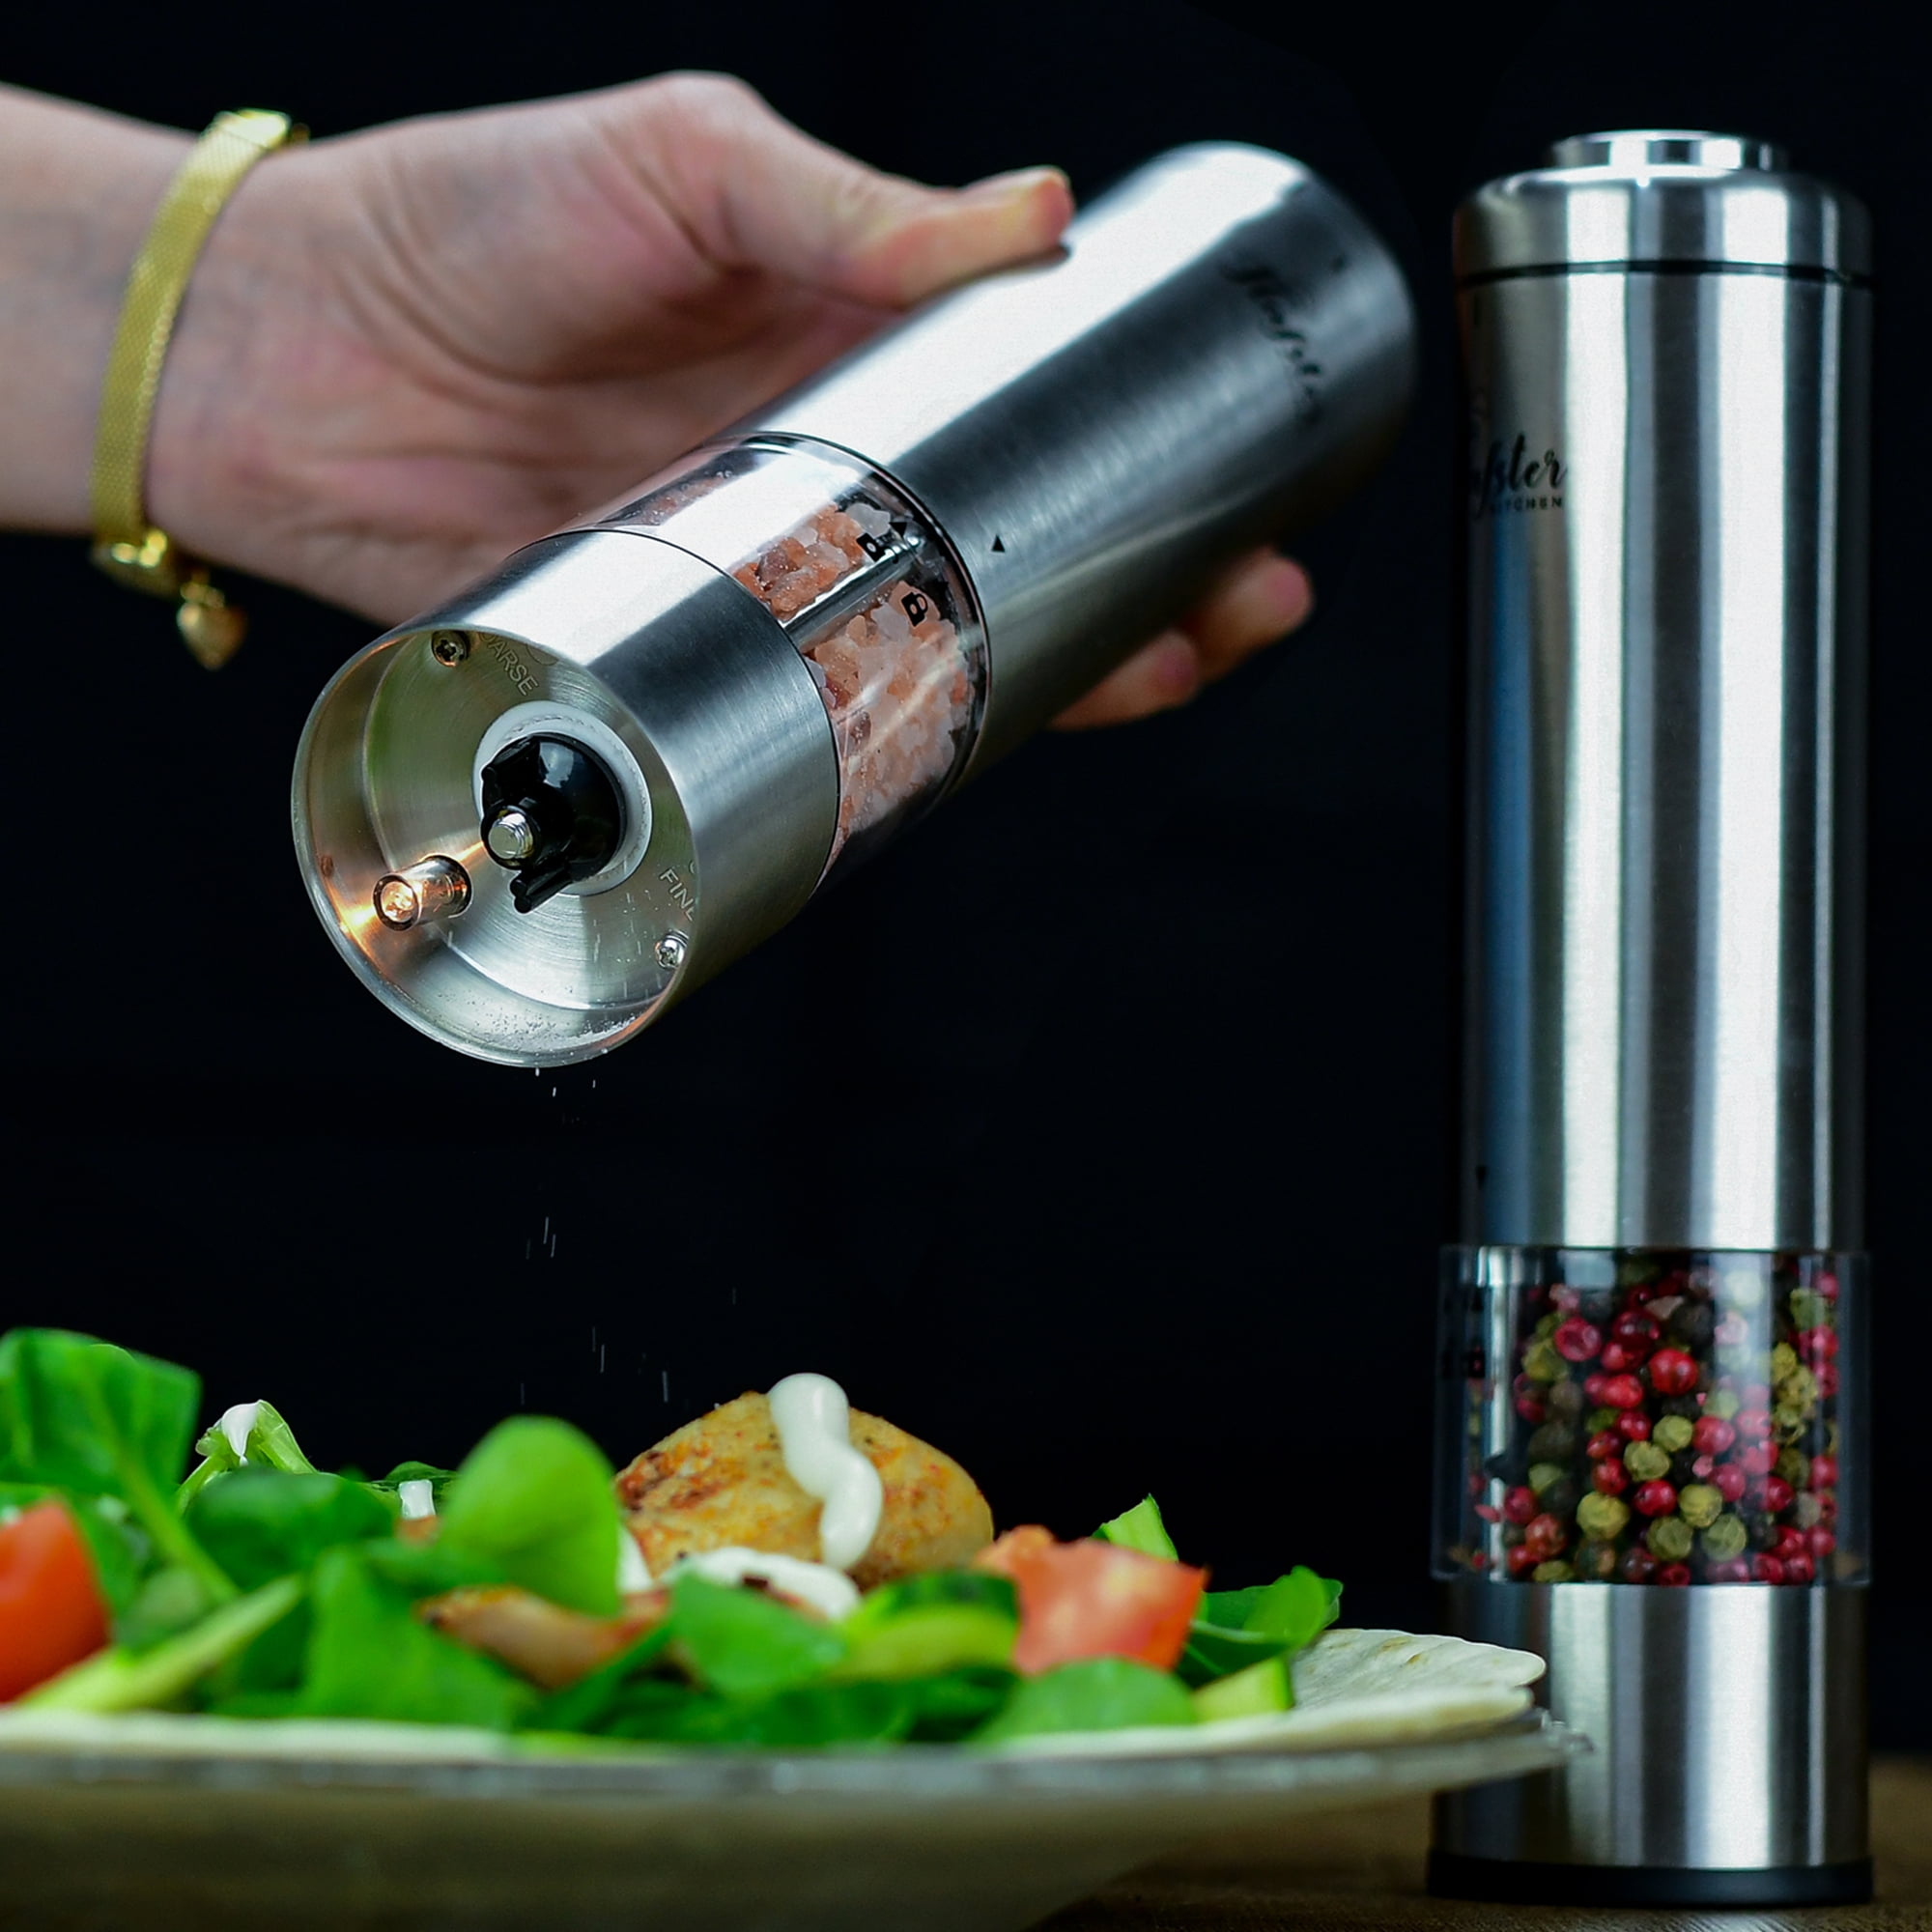 Flafster Kitchen Stainless Steel Battery Operated Electric Salt